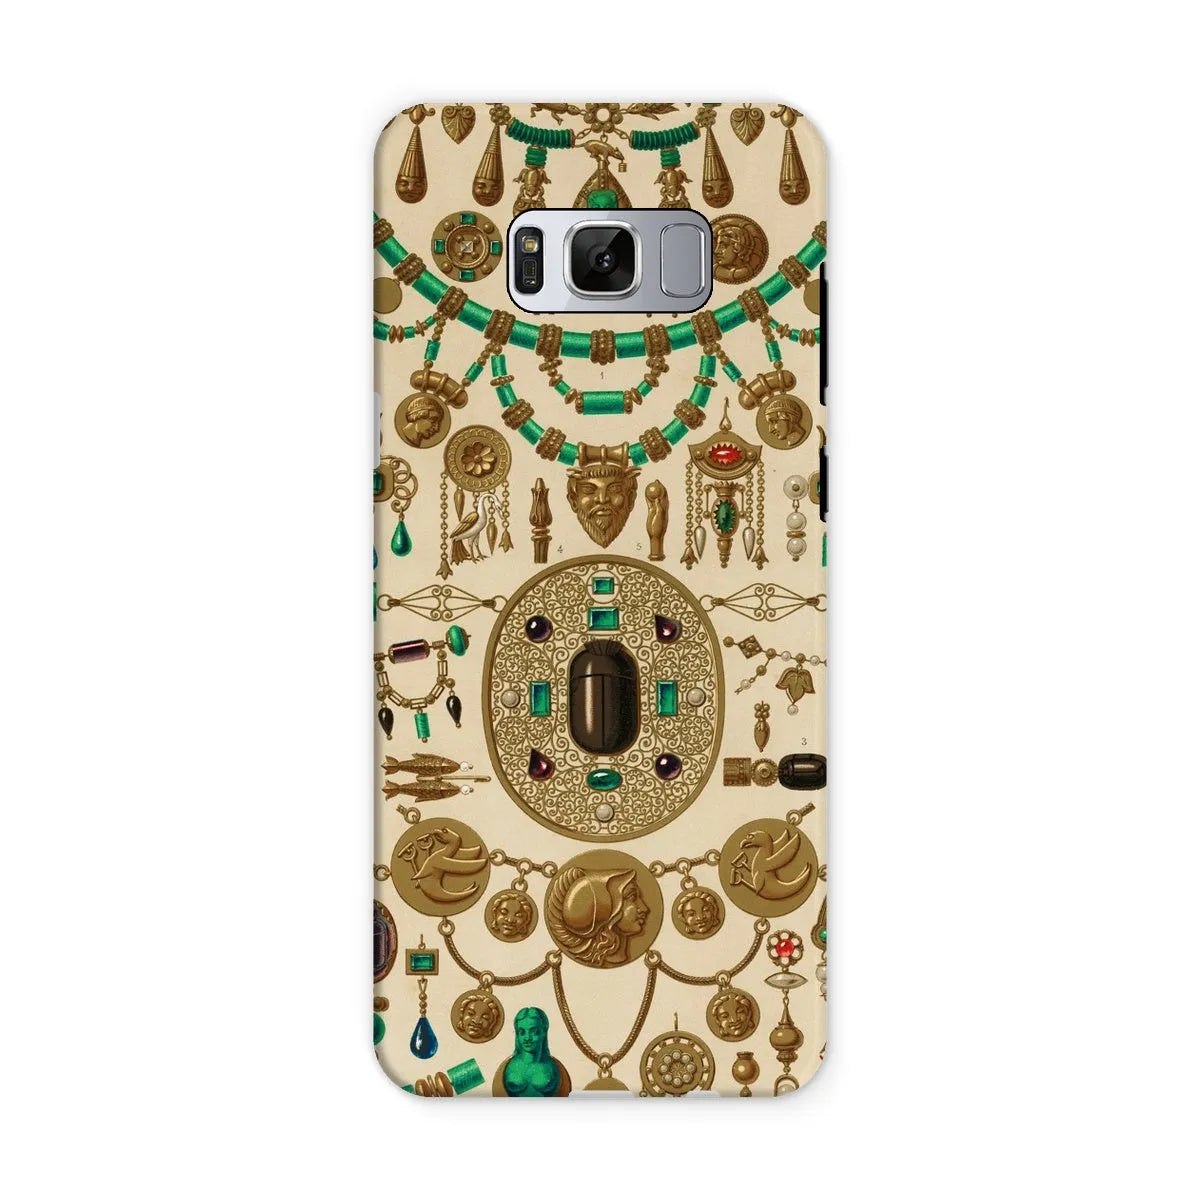 Etruscan Patterns From L’ornement Polychrome By Auguste Racinet Tough Phone Case - Samsung Galaxy S8 / Matte - Mobile